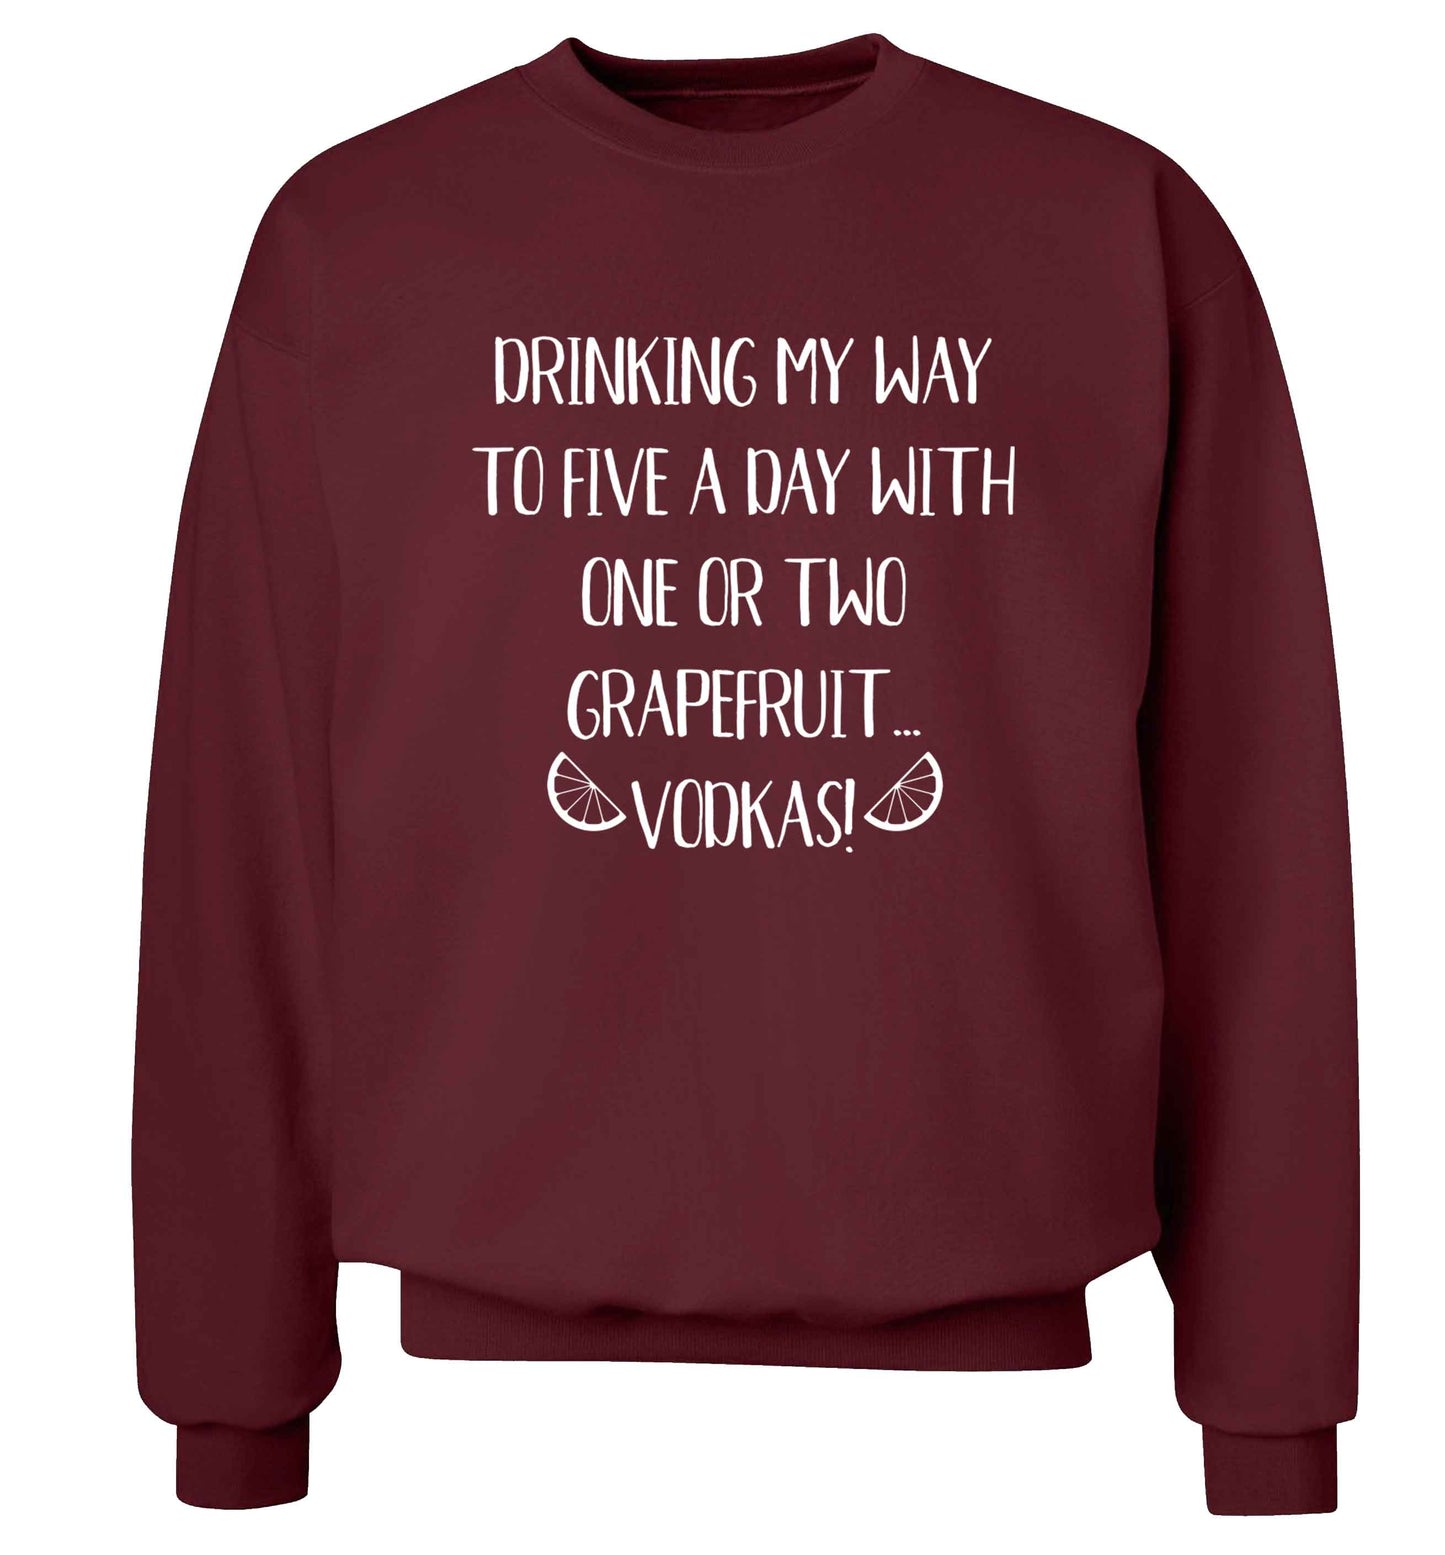 Drinking my way to five a day with one or two grapefruit vodkas Adult's unisex maroon Sweater 2XL